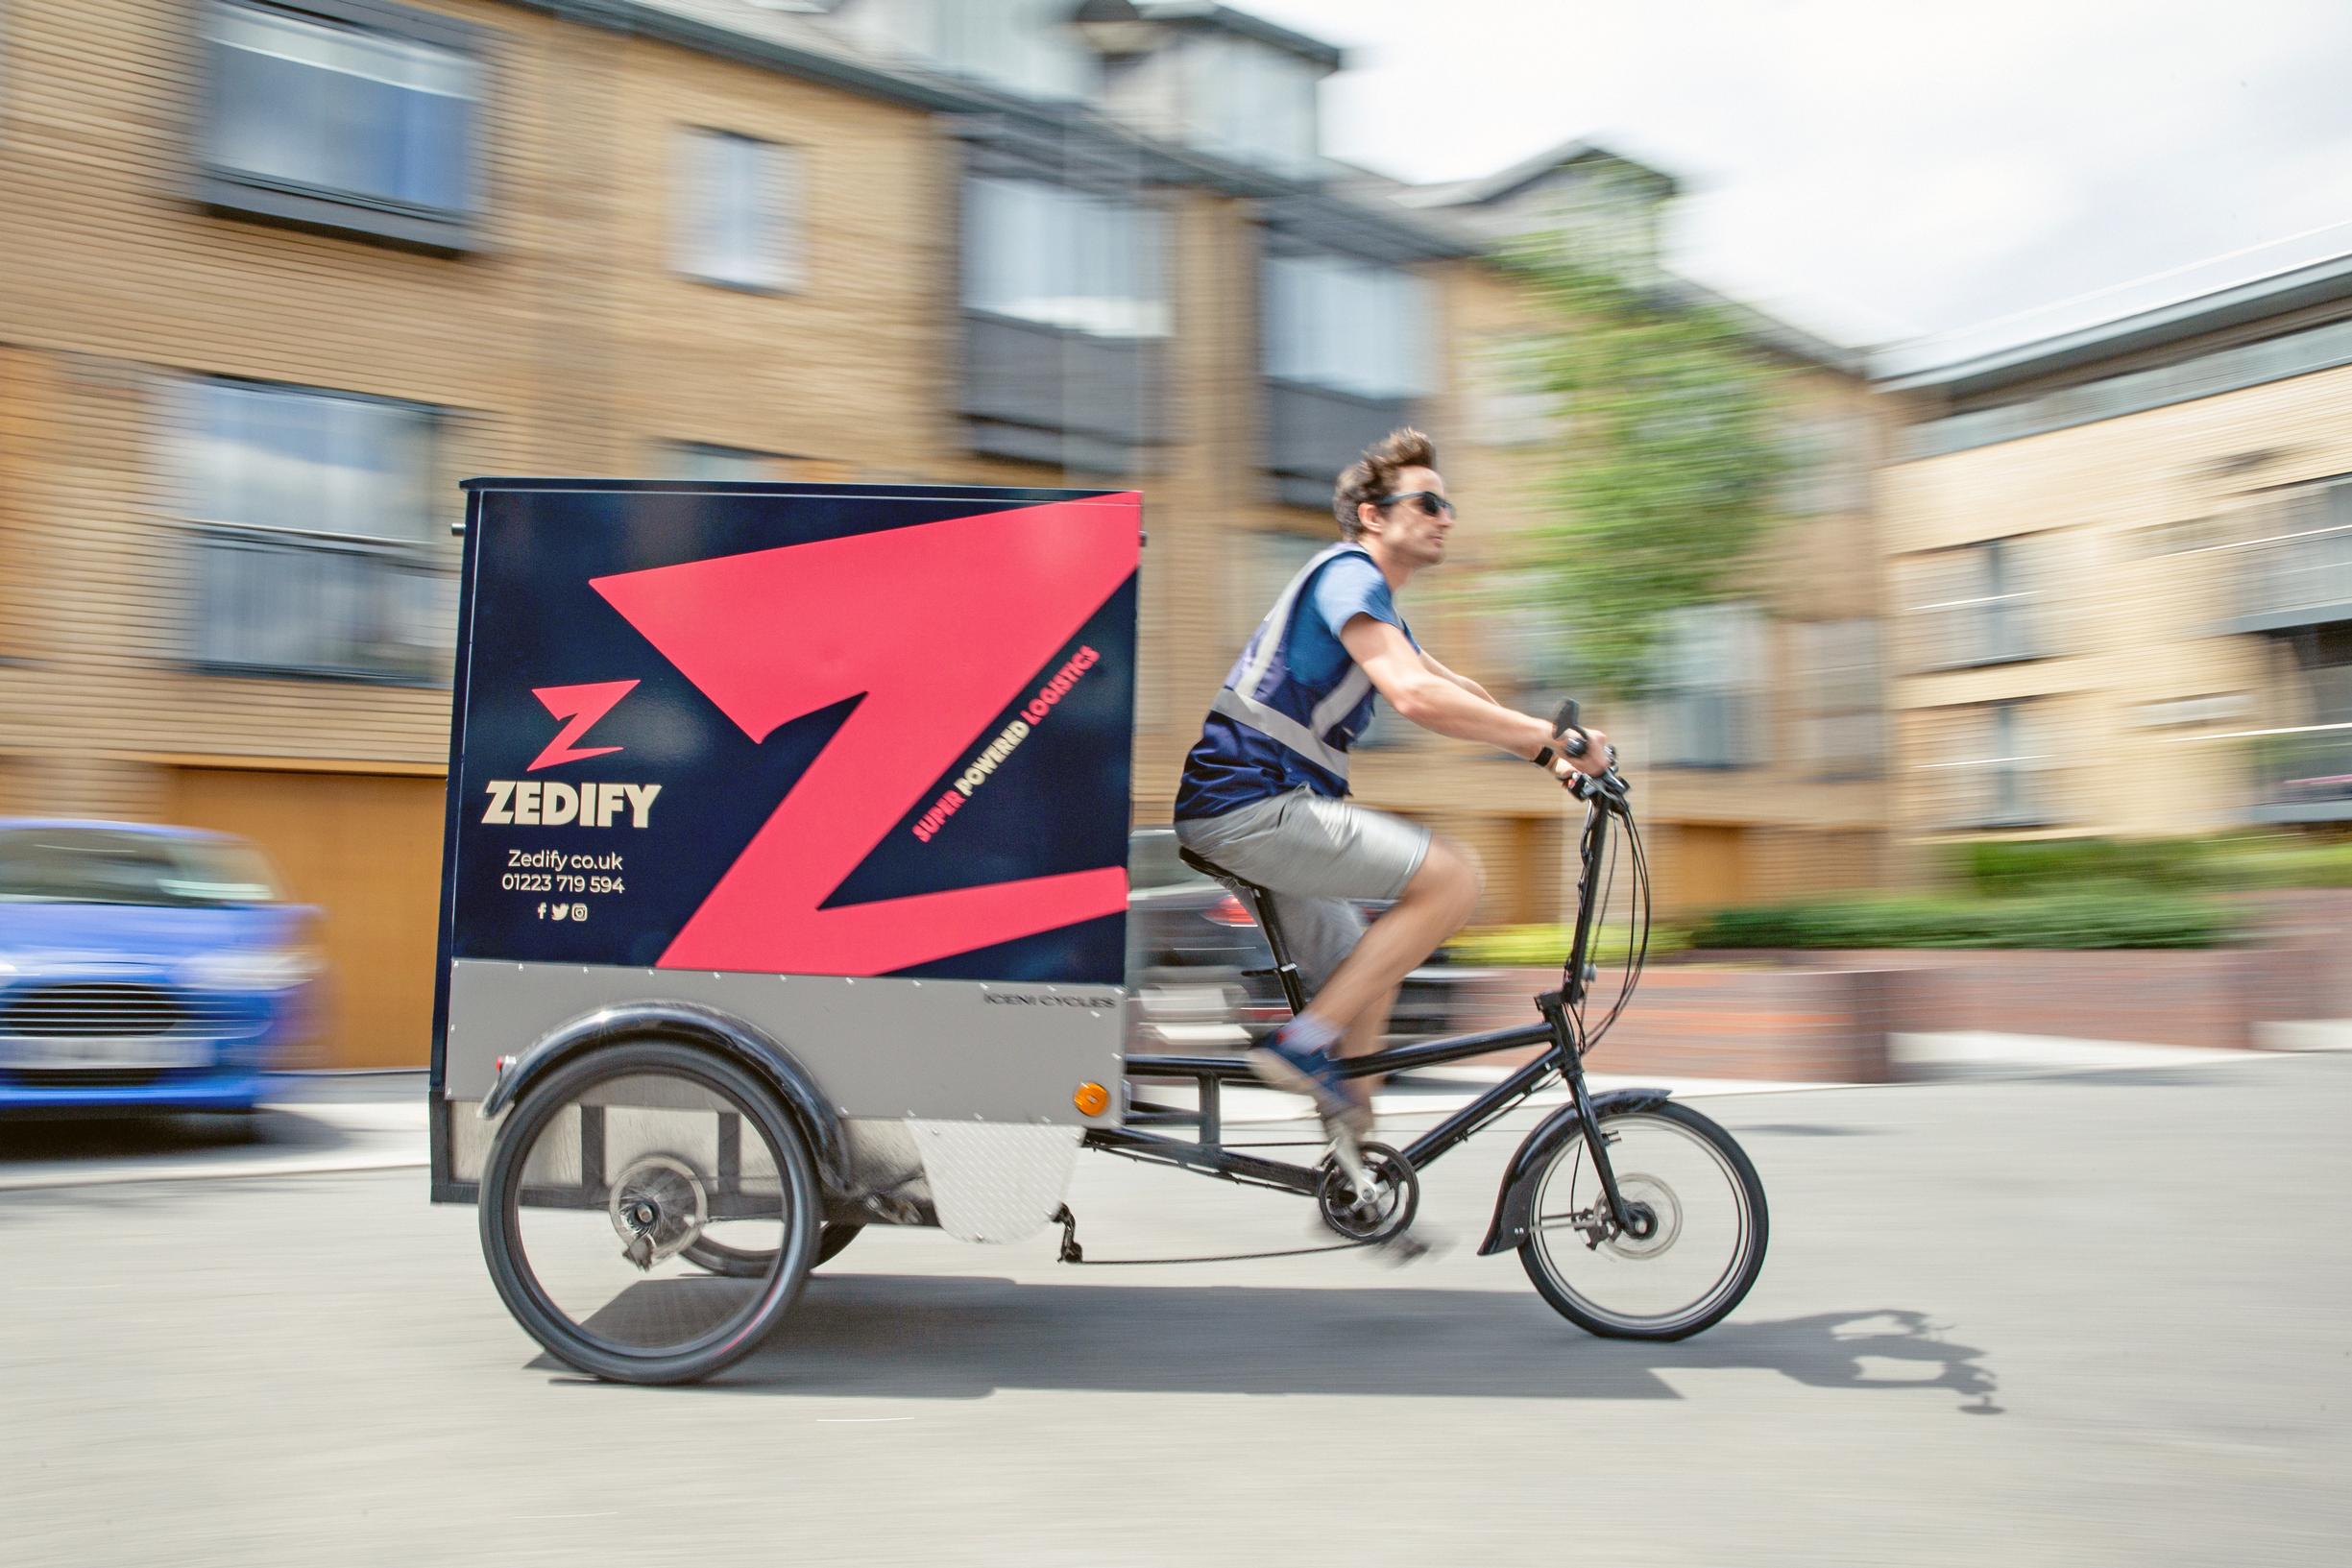 Zedify’s cargo bikes can carry loads of up to 200kg